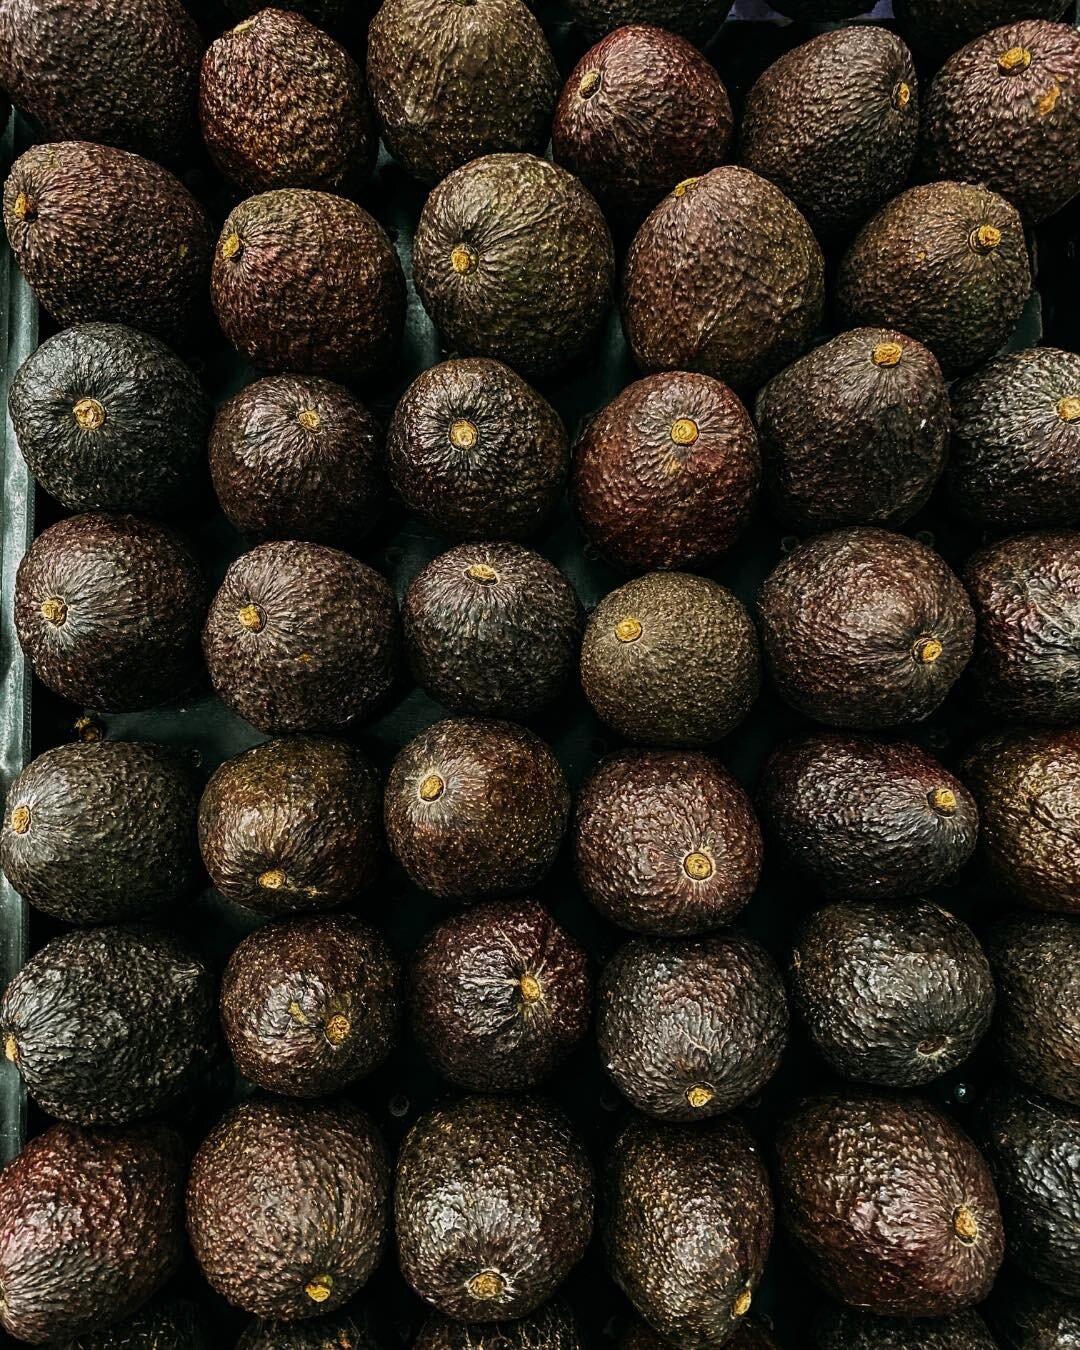 If you are looking to offer the best avocados in your business....

Contact us to be your suppliers of the best avocados
📲 Sales: Sale: (805) 835 6162
📩 Mail: info@ricosavocados.com

#ricosavocados #avocados #freshproducersupplier #avocadosuppliers